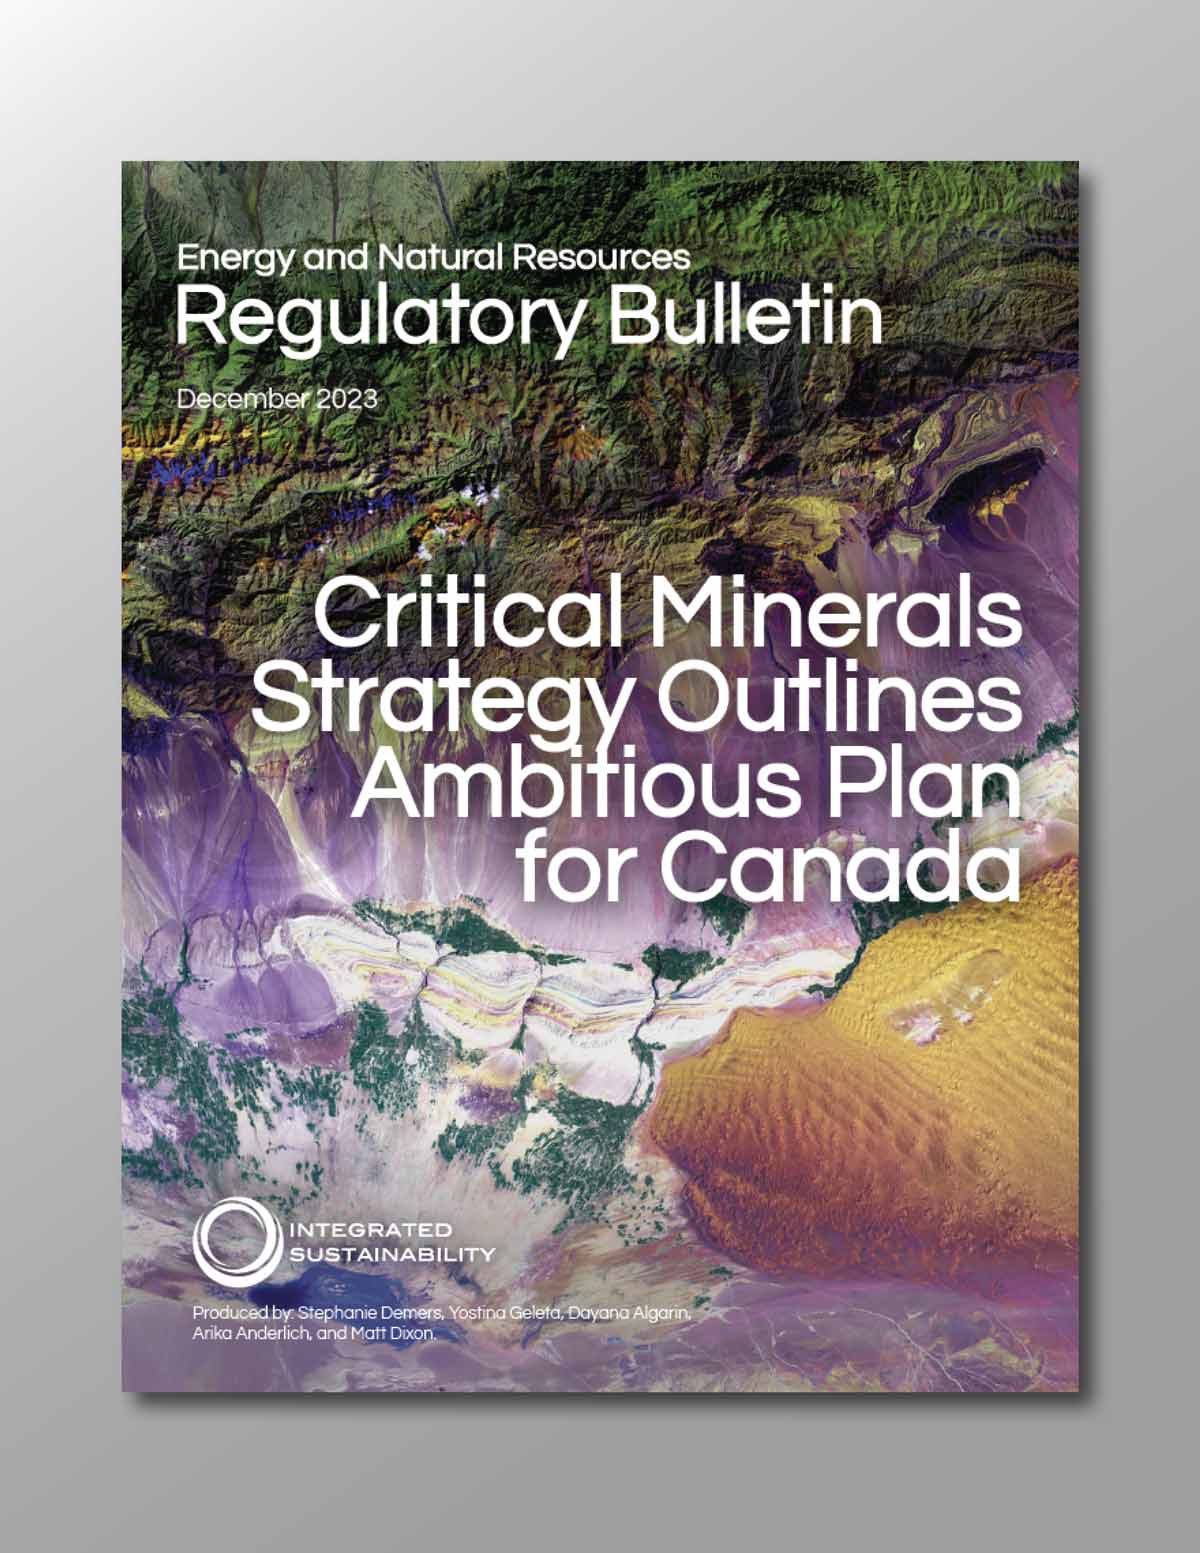 Download The Energy and Natural Resources Regulatory Bulletin